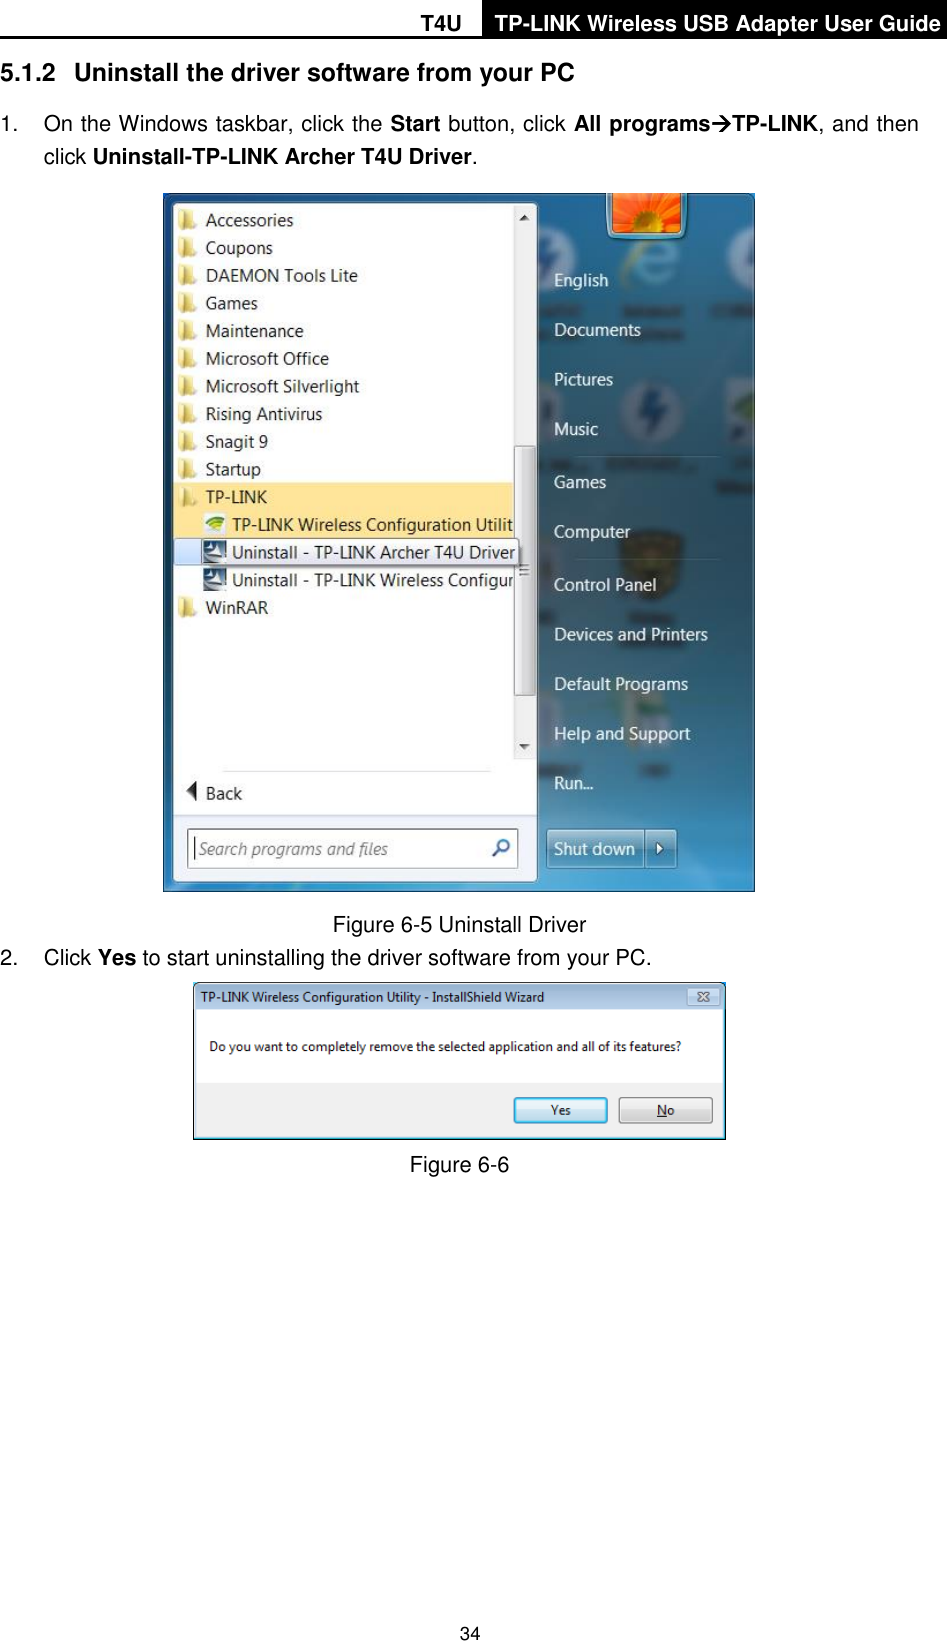 T4U TP-LINK Wireless USB Adapter User Guide   34 5.1.2  Uninstall the driver software from your PC 1.  On the Windows taskbar, click the Start button, click All programsTP-LINK, and then click Uninstall-TP-LINK Archer T4U Driver.  Figure 6-5 Uninstall Driver 2.  Click Yes to start uninstalling the driver software from your PC.  Figure 6-6 